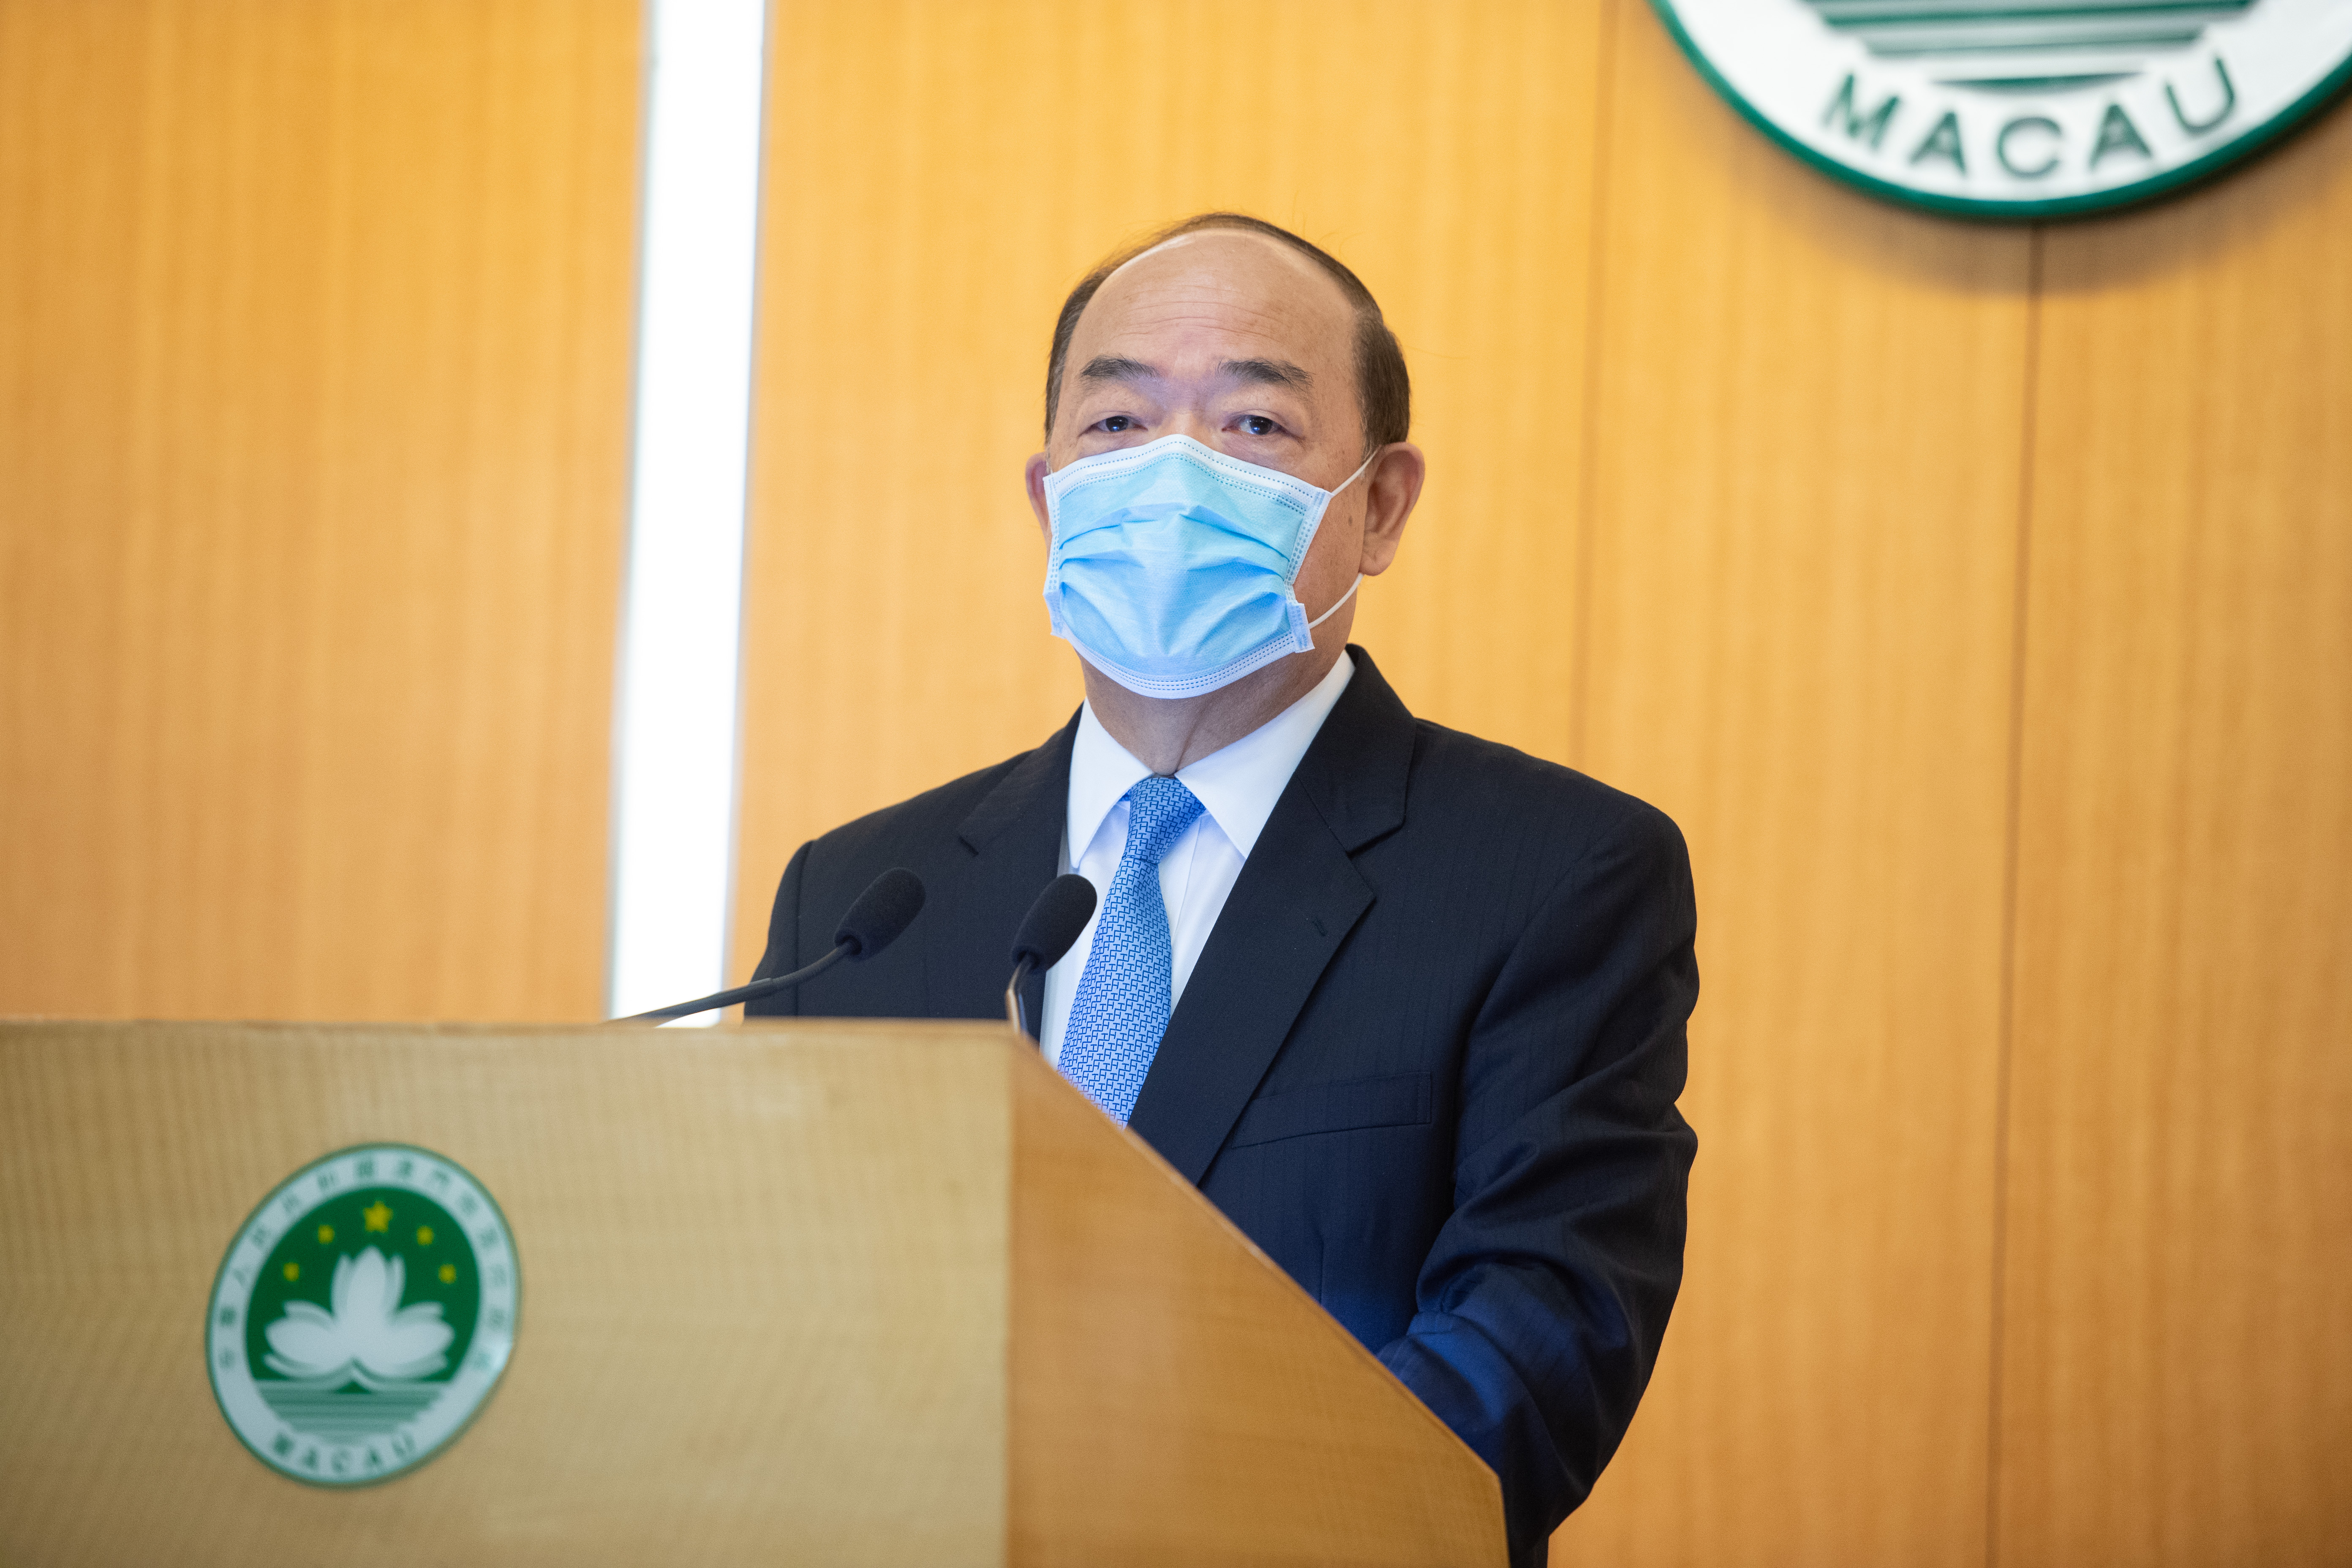 Ho stresses biosecurity in National Security Education Day speech